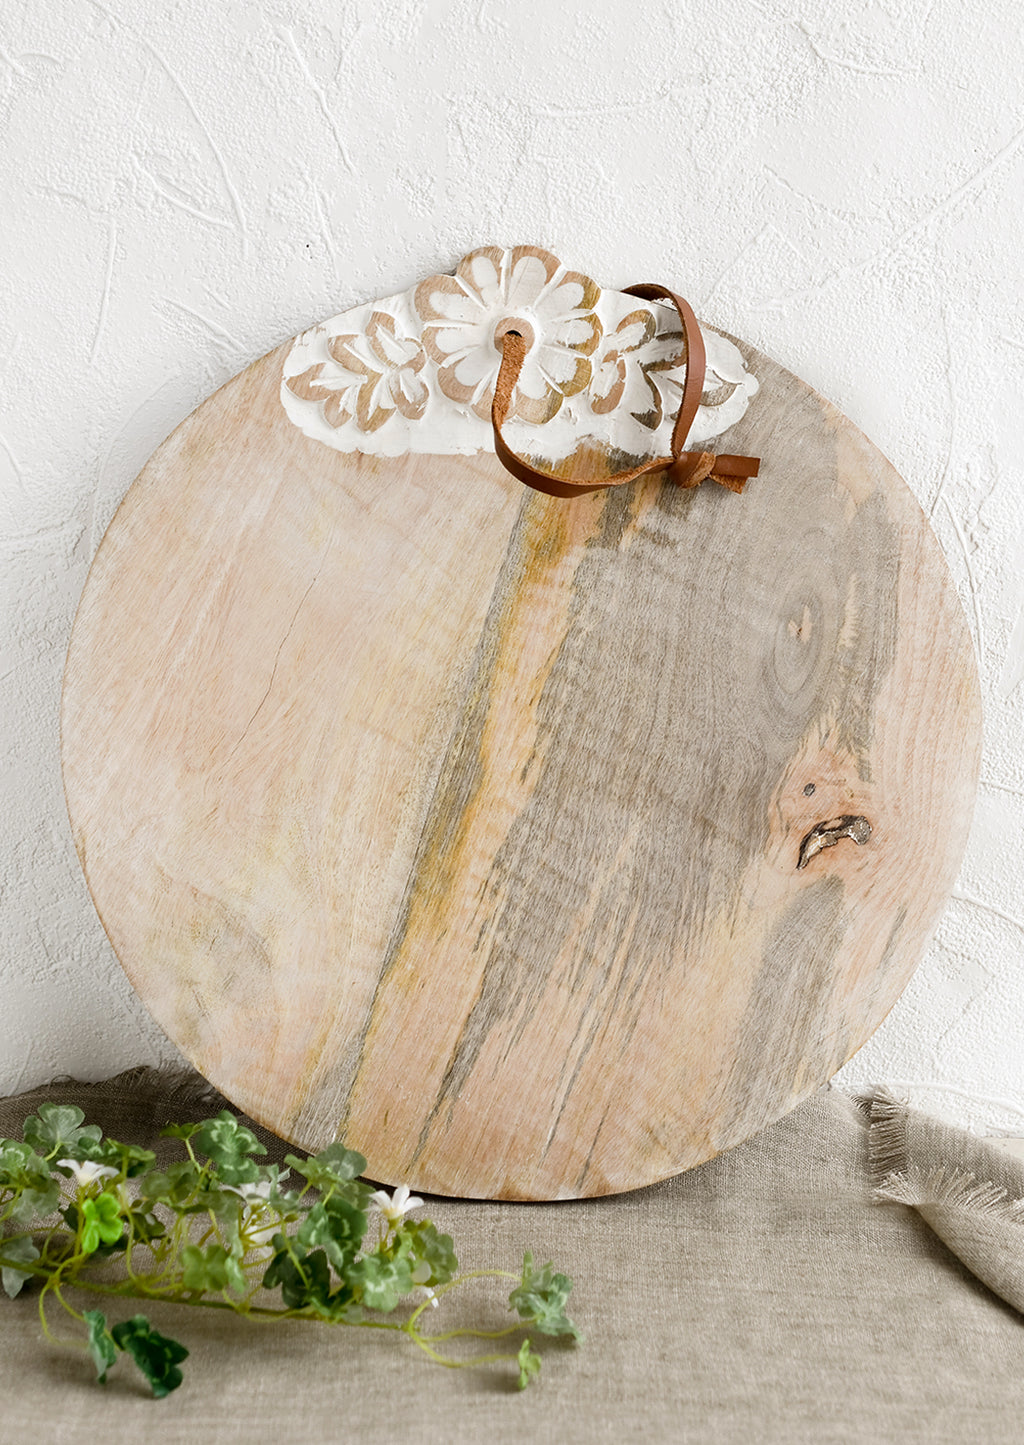 1: A round wooden cutting board with shabby chic floral detailing.